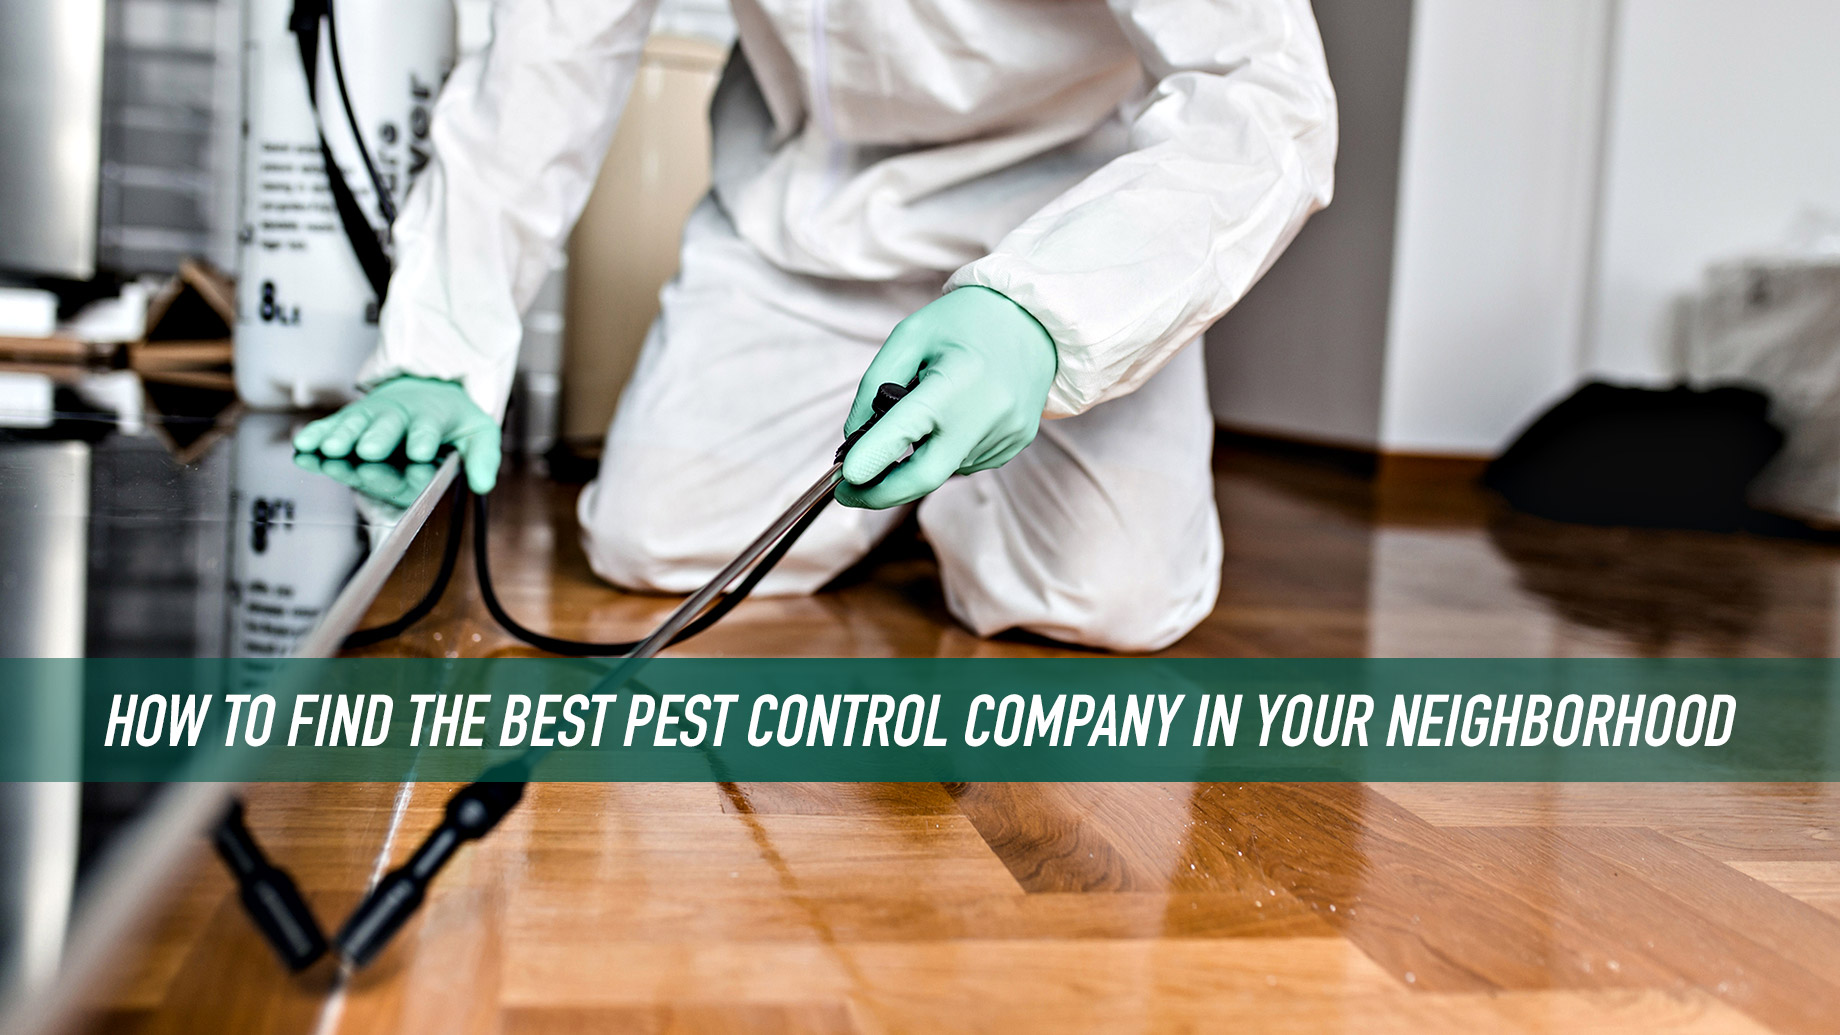 How to Find the Best Pest Control Company in Your Neighborhood